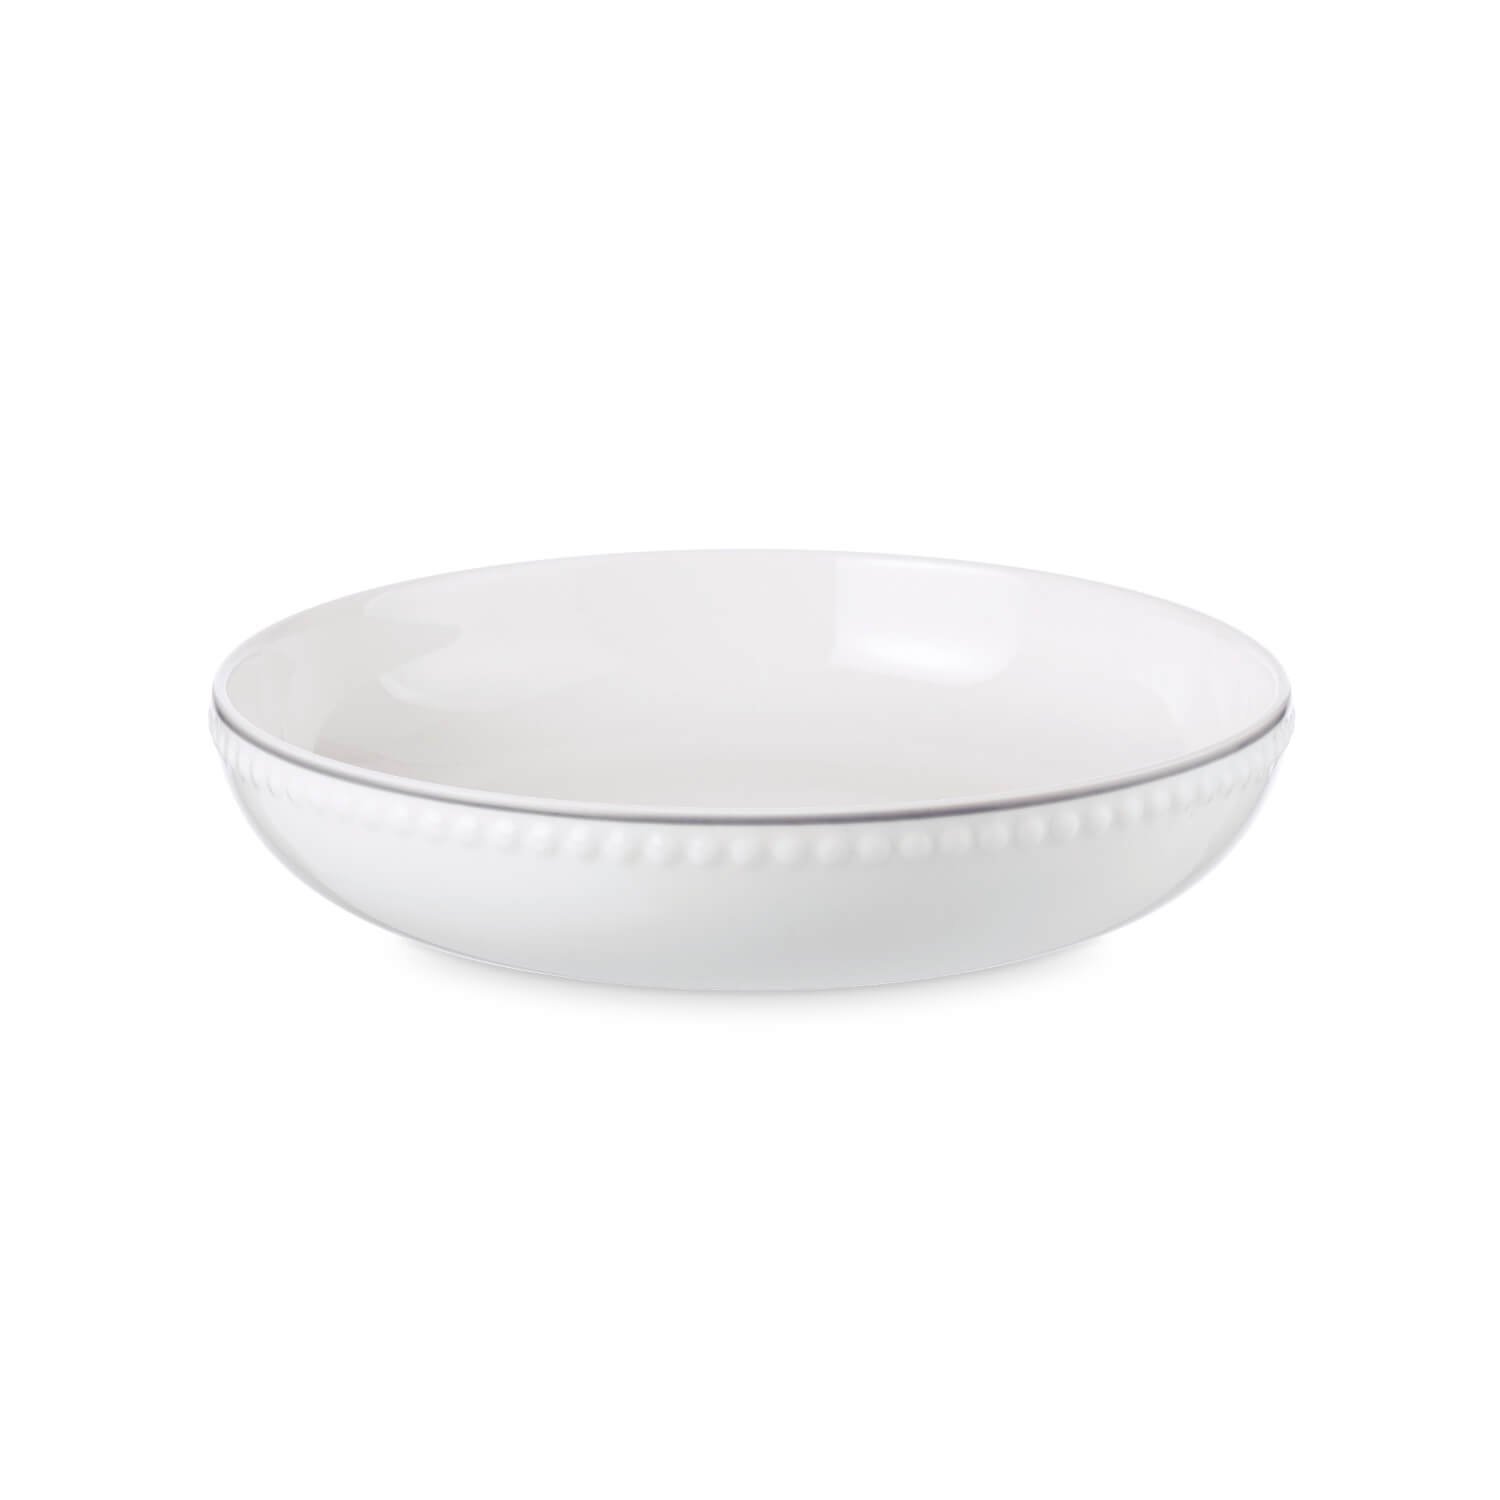 Mary Berry SIGNATURE COLLECTION PASTA BOWL 21cm